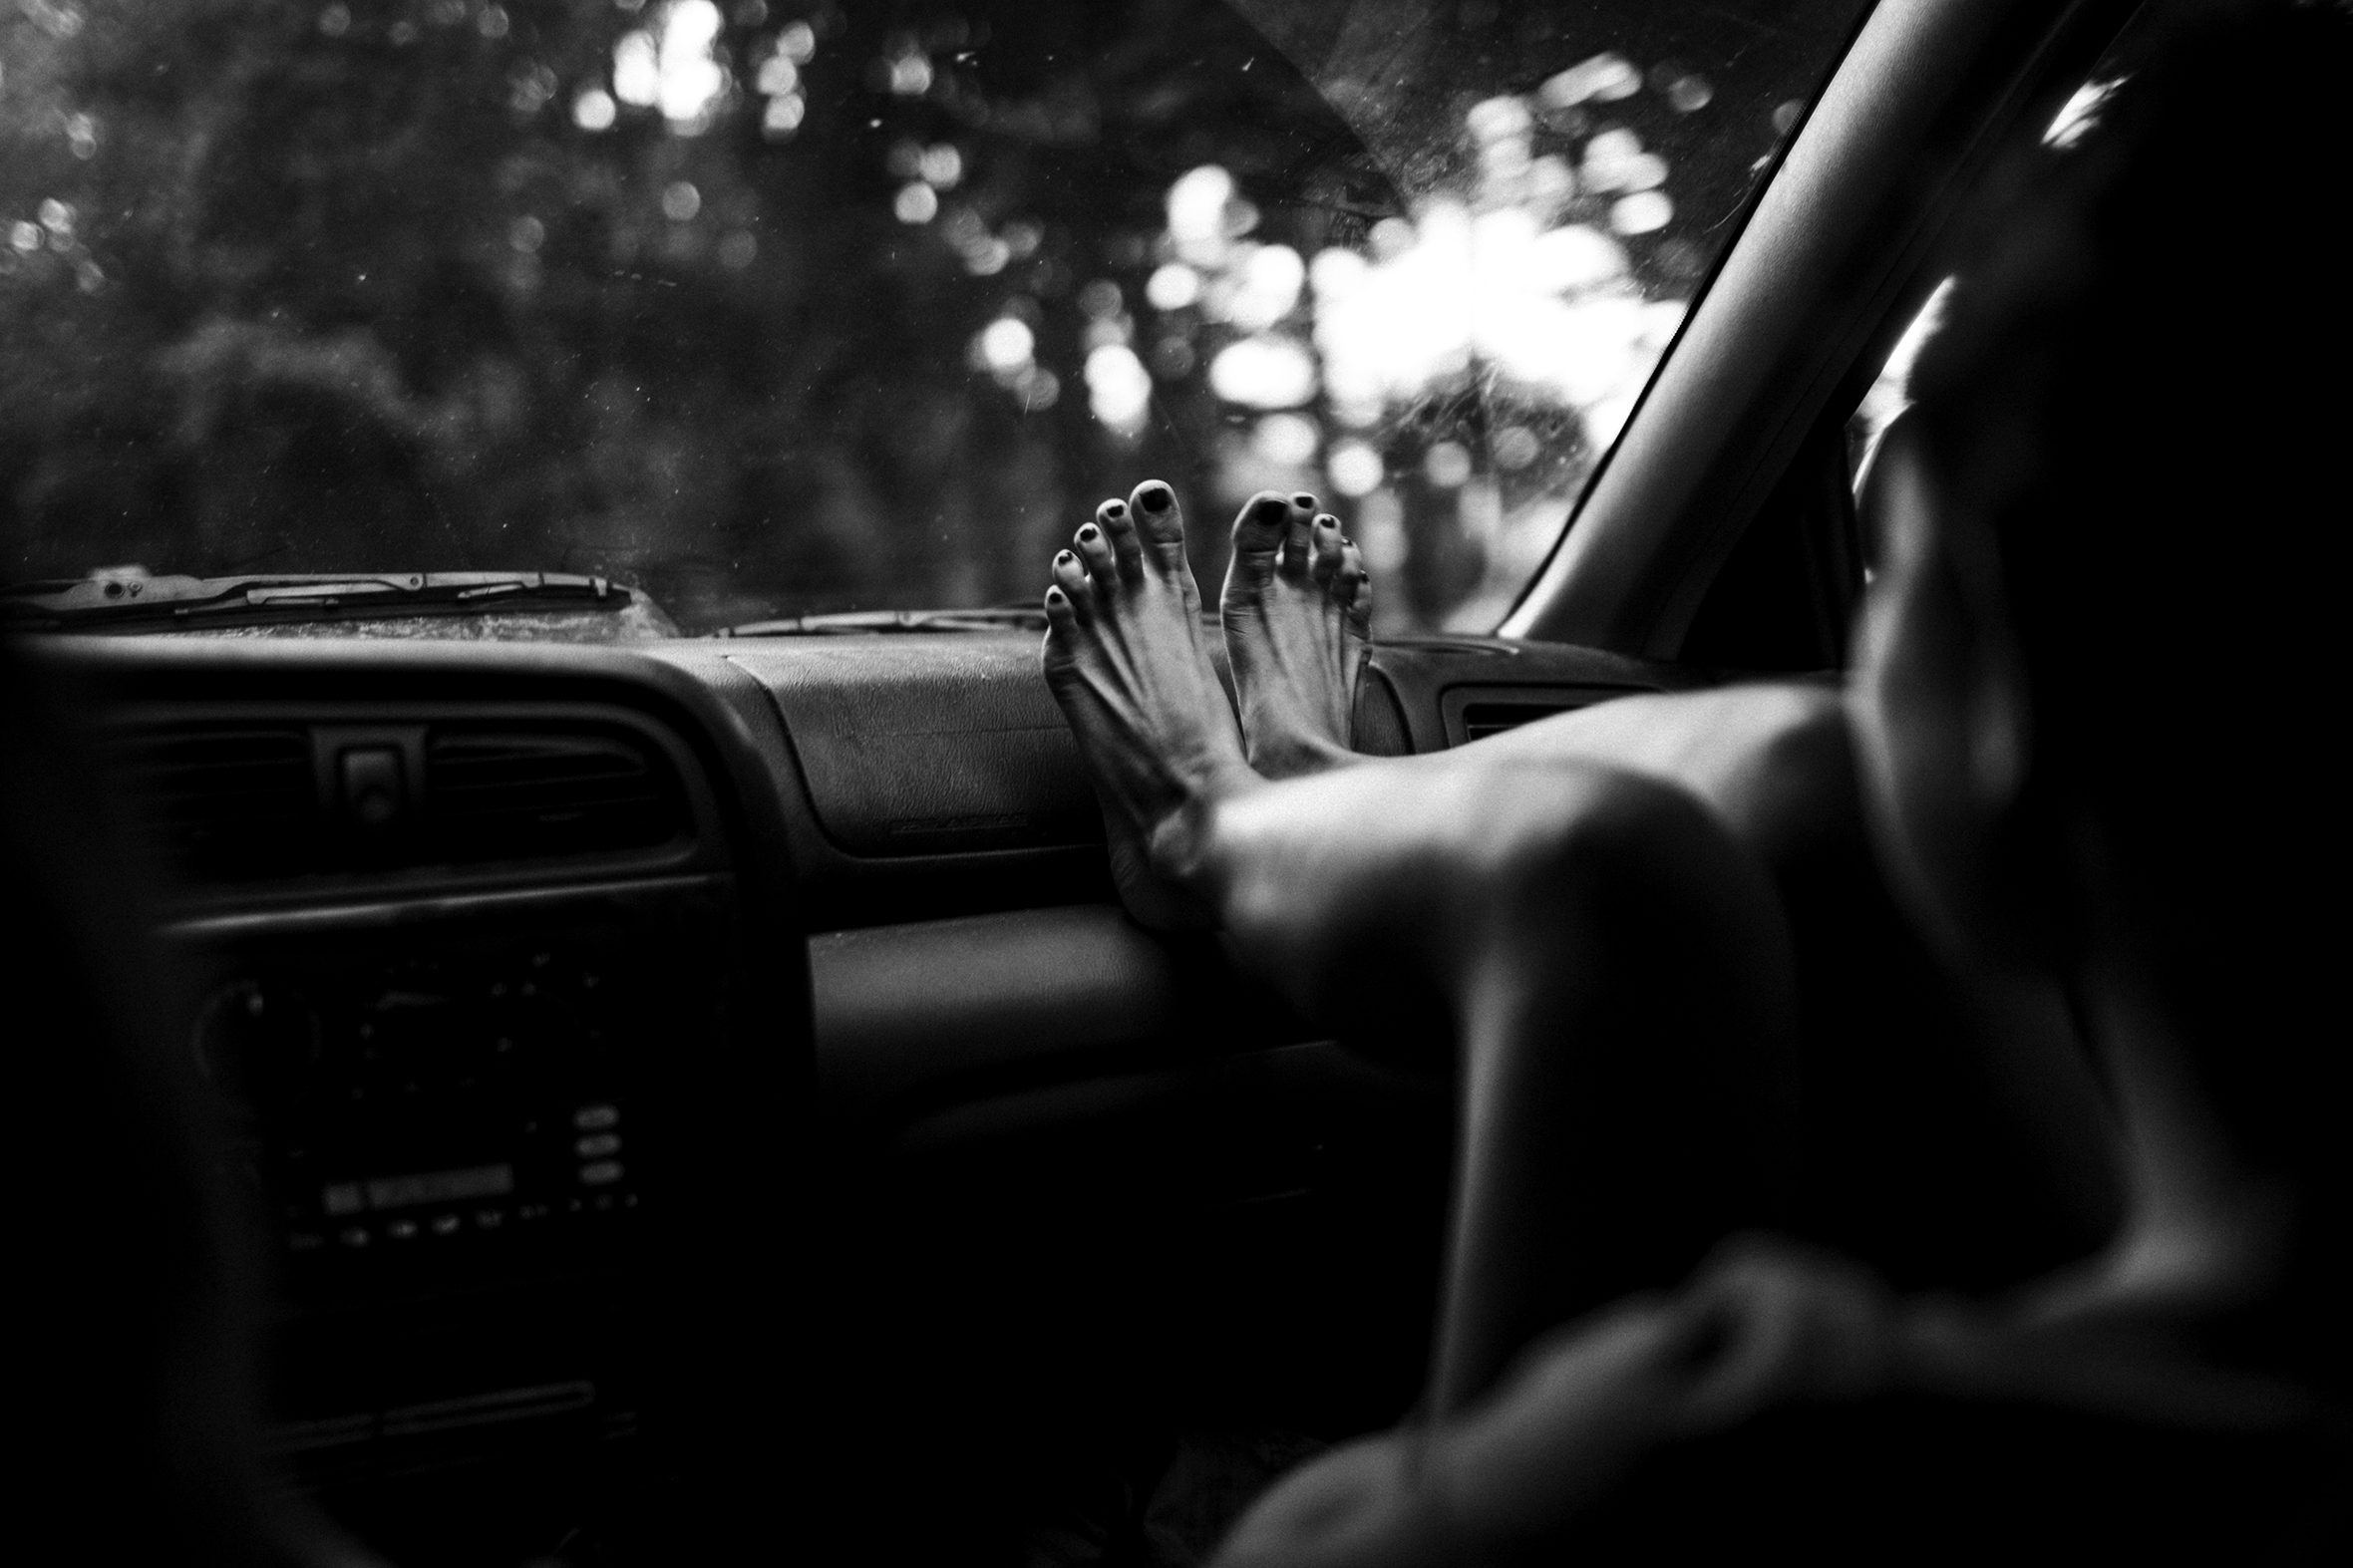 A person’s feet resting on the dashboard of a car